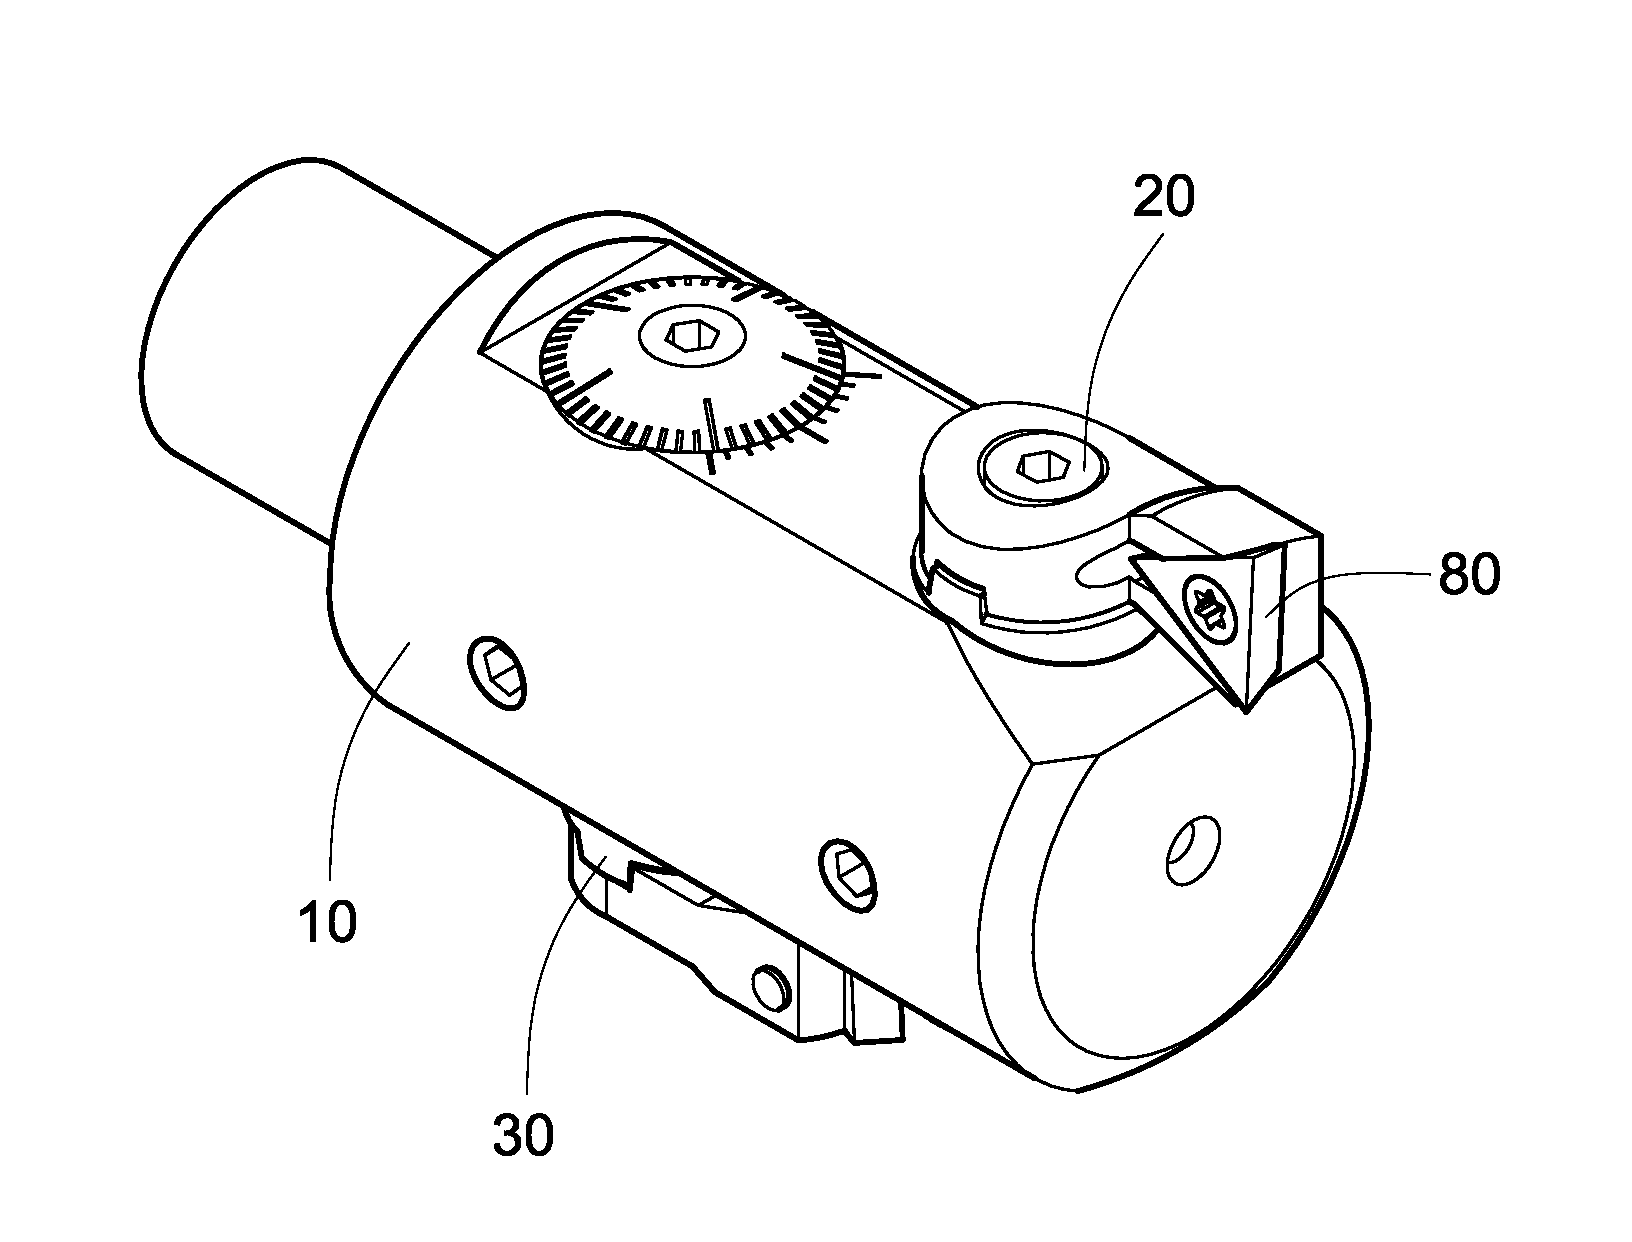 Boring bar fastening device for single or double blade